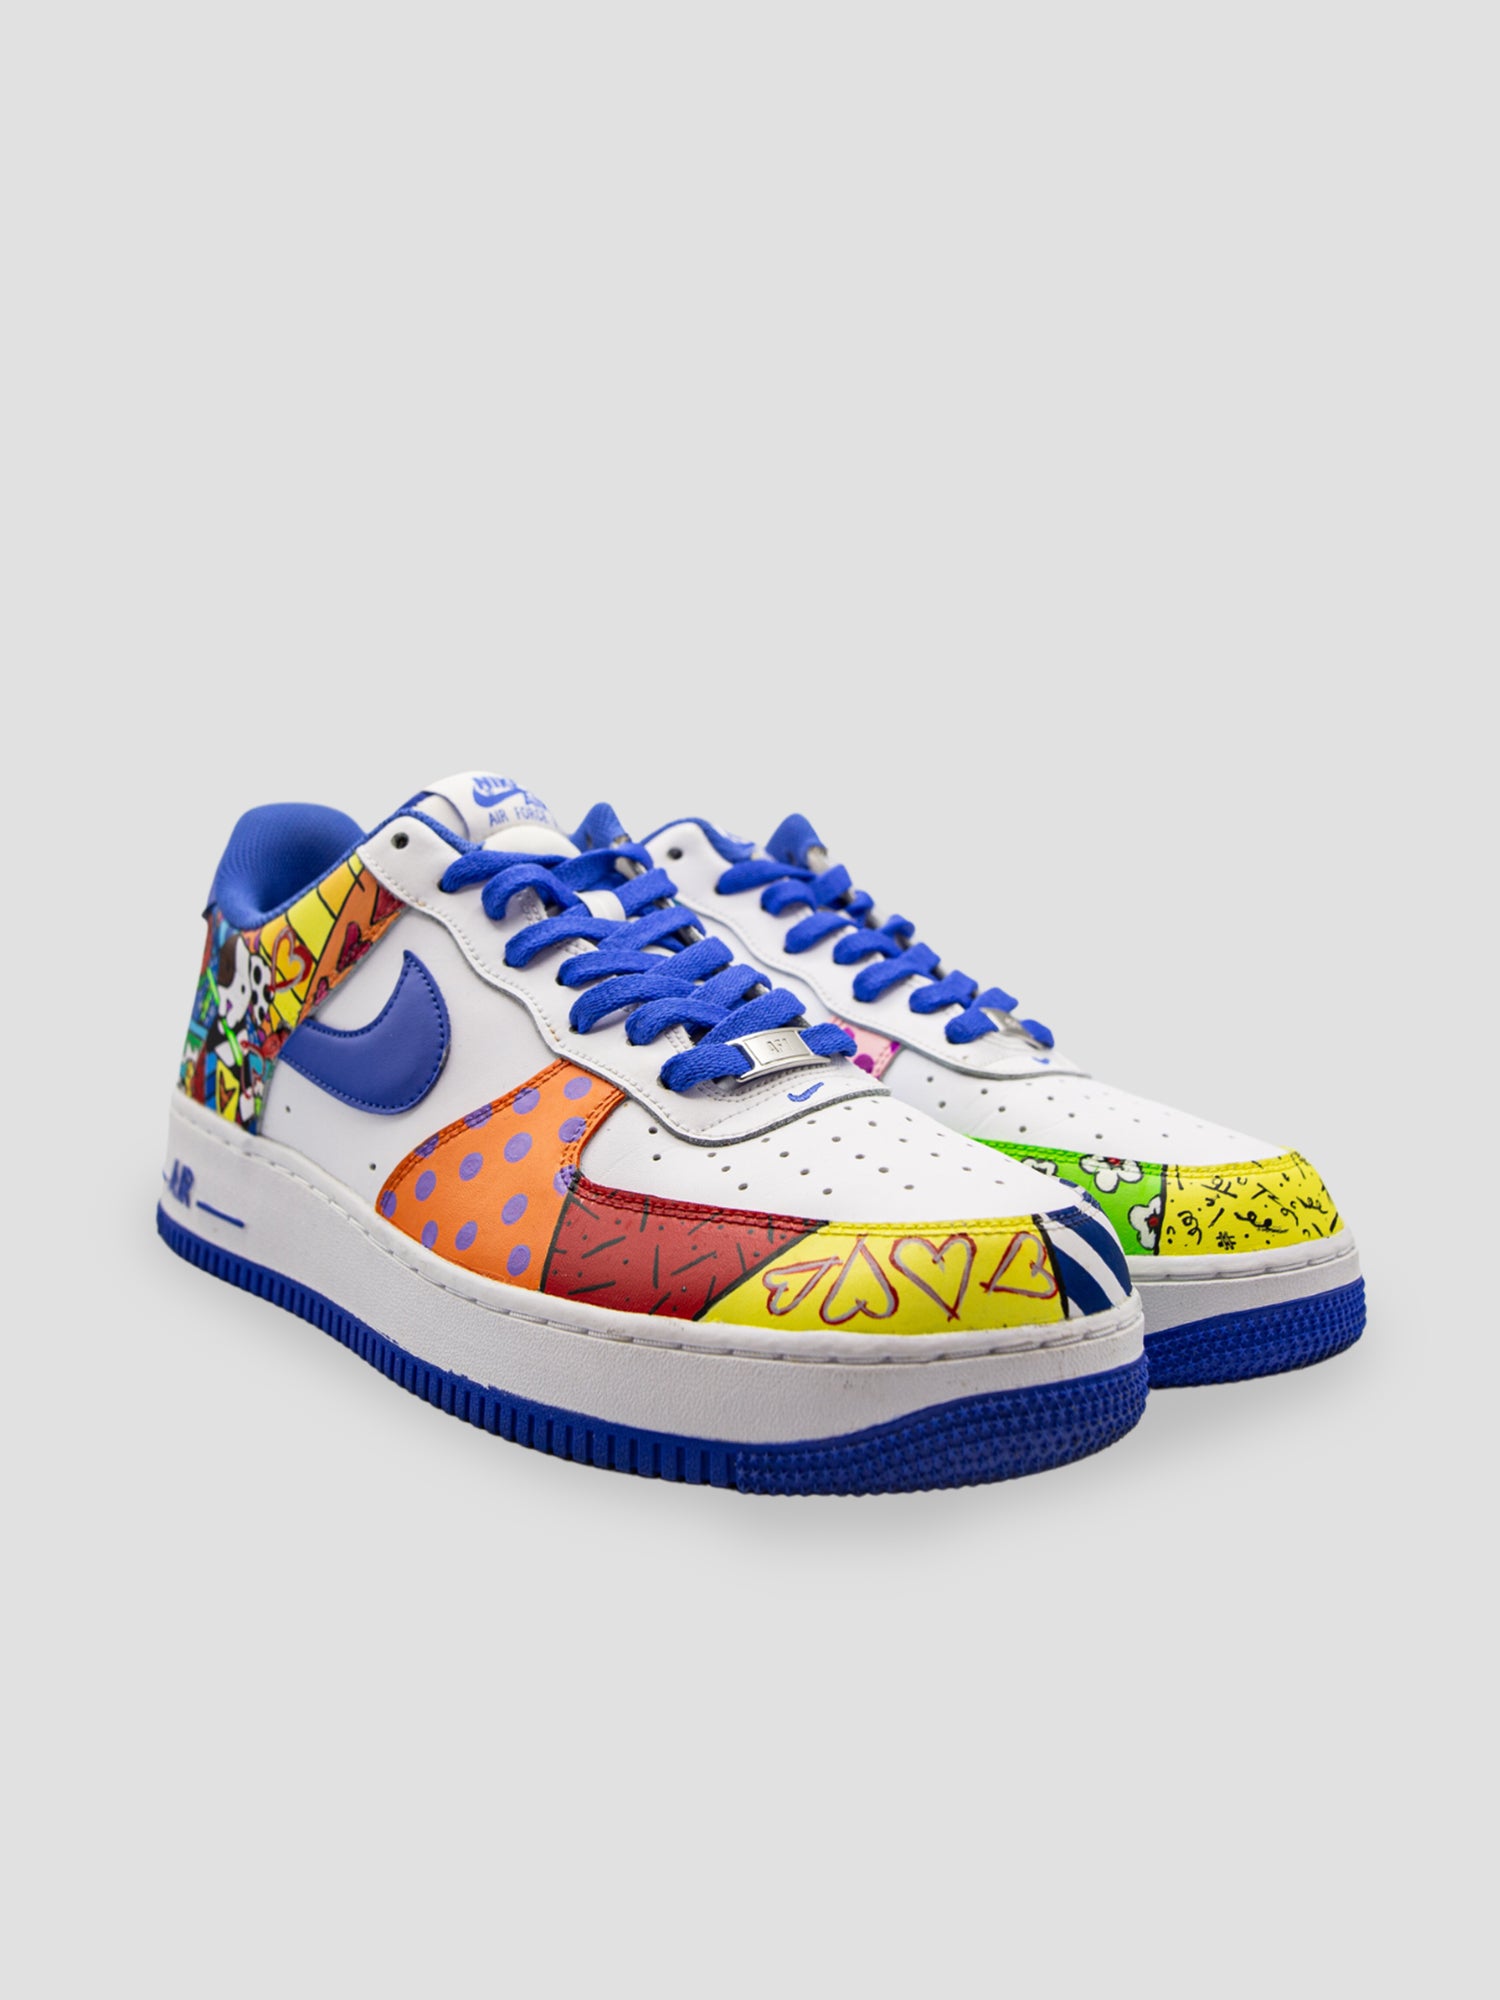 Custom Airbrush Nike Air Force 1 Gold Hearts Style Shoes -  Portugal